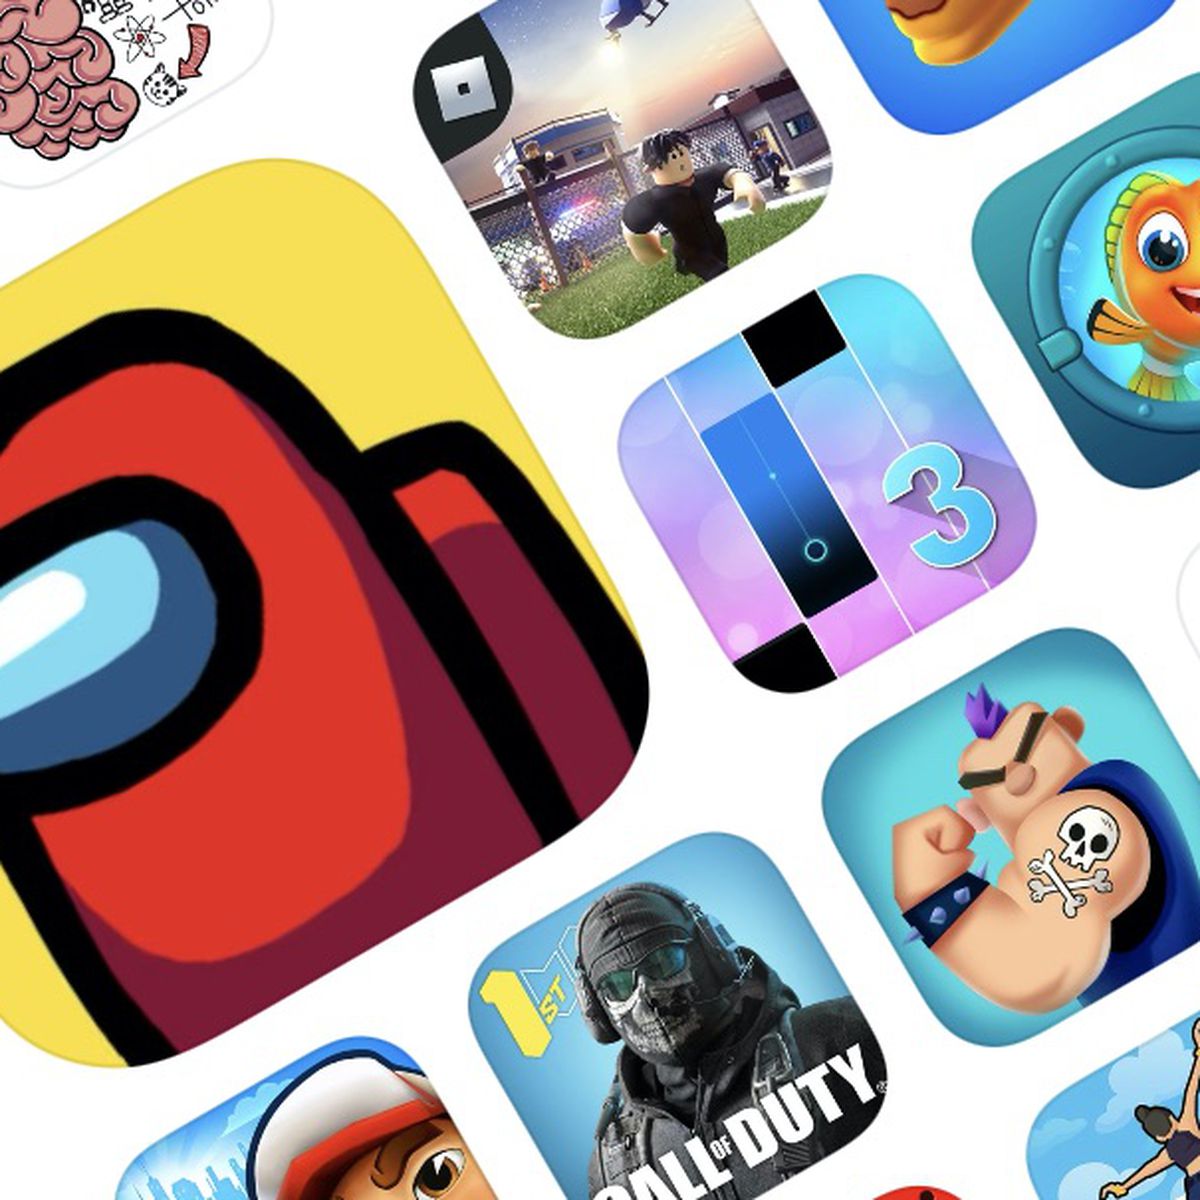 Apple Reveals the Most Downloaded iOS Apps and Games of 2021 - MacRumors